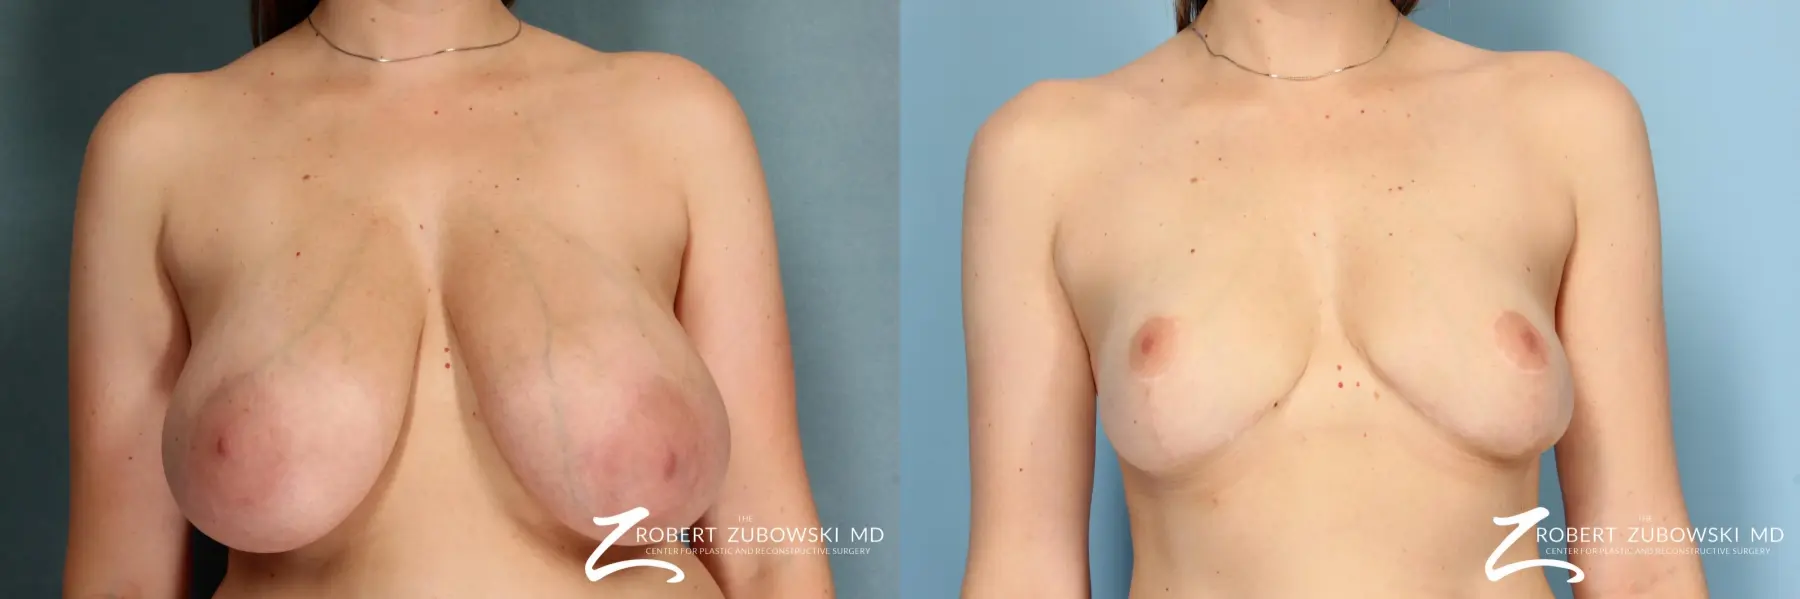 Breast Lift And Augmentation: Patient 10 - Before and After 1